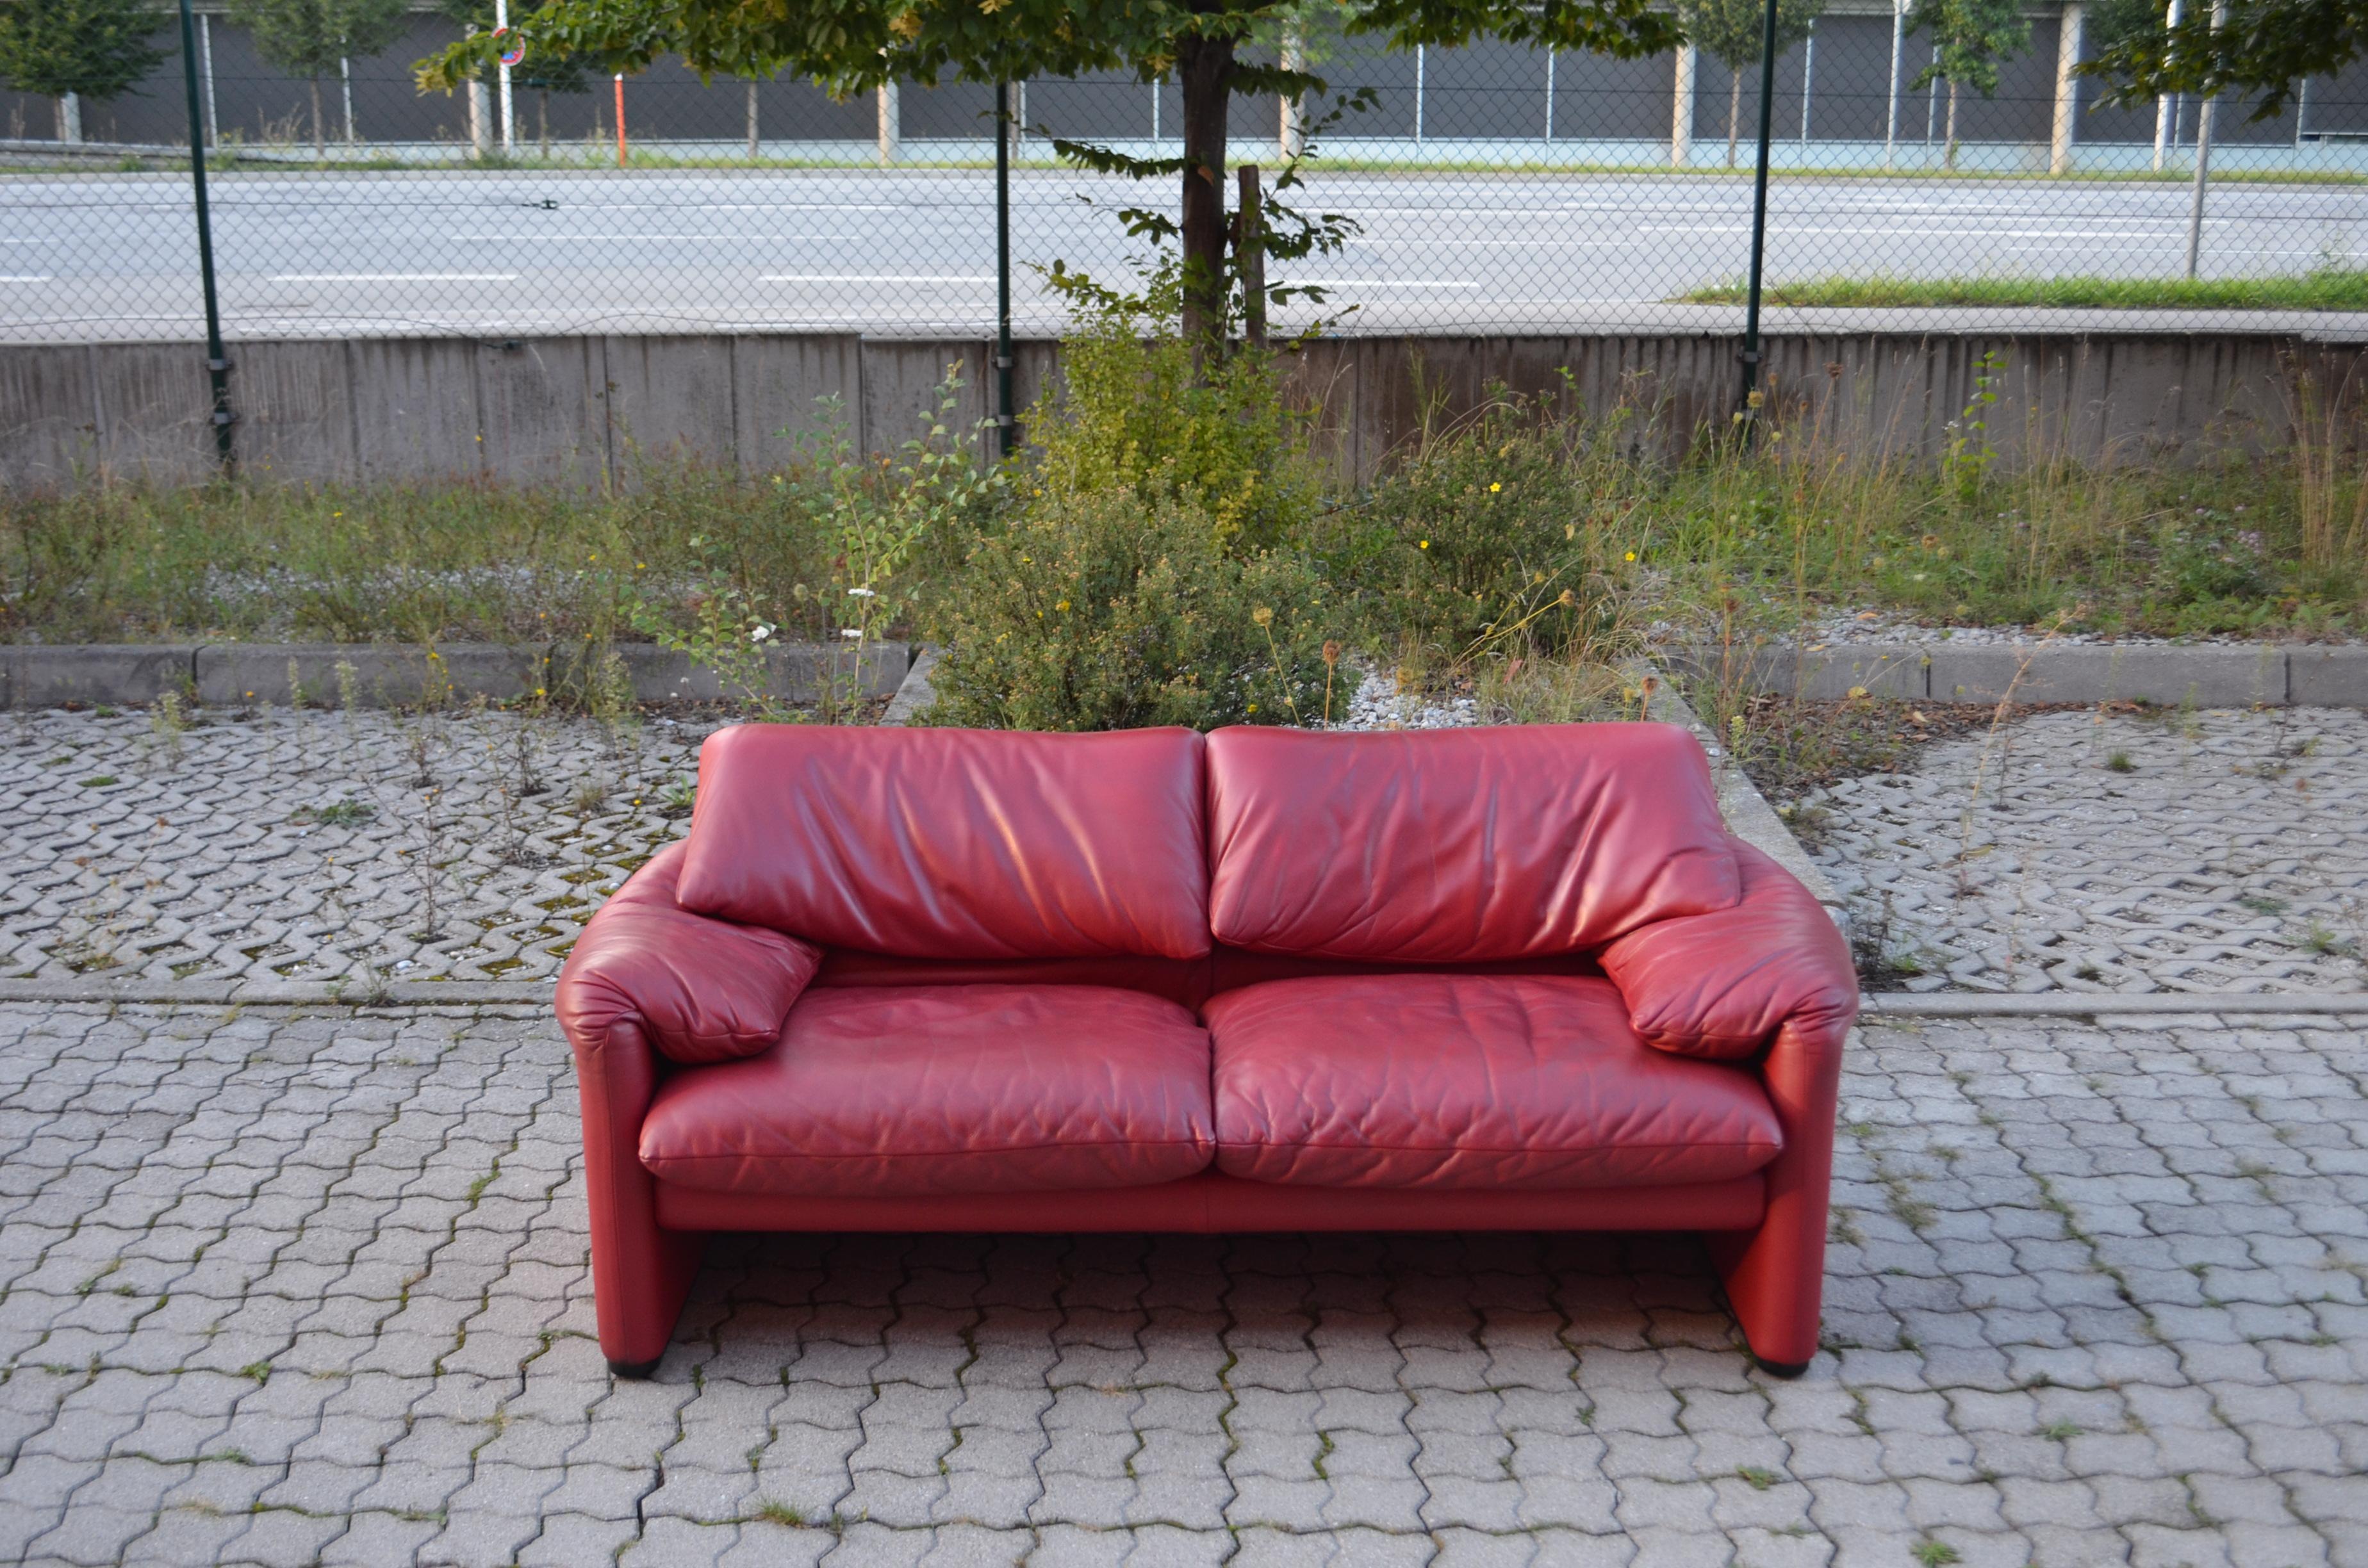 Cassina Modell Maralunga leather sofa
It has a convertible headrest.
The color is a red berry semianiline leather.
Great patina.
A classic Italian masterpiece with high comfort made by Vico Magistretti.